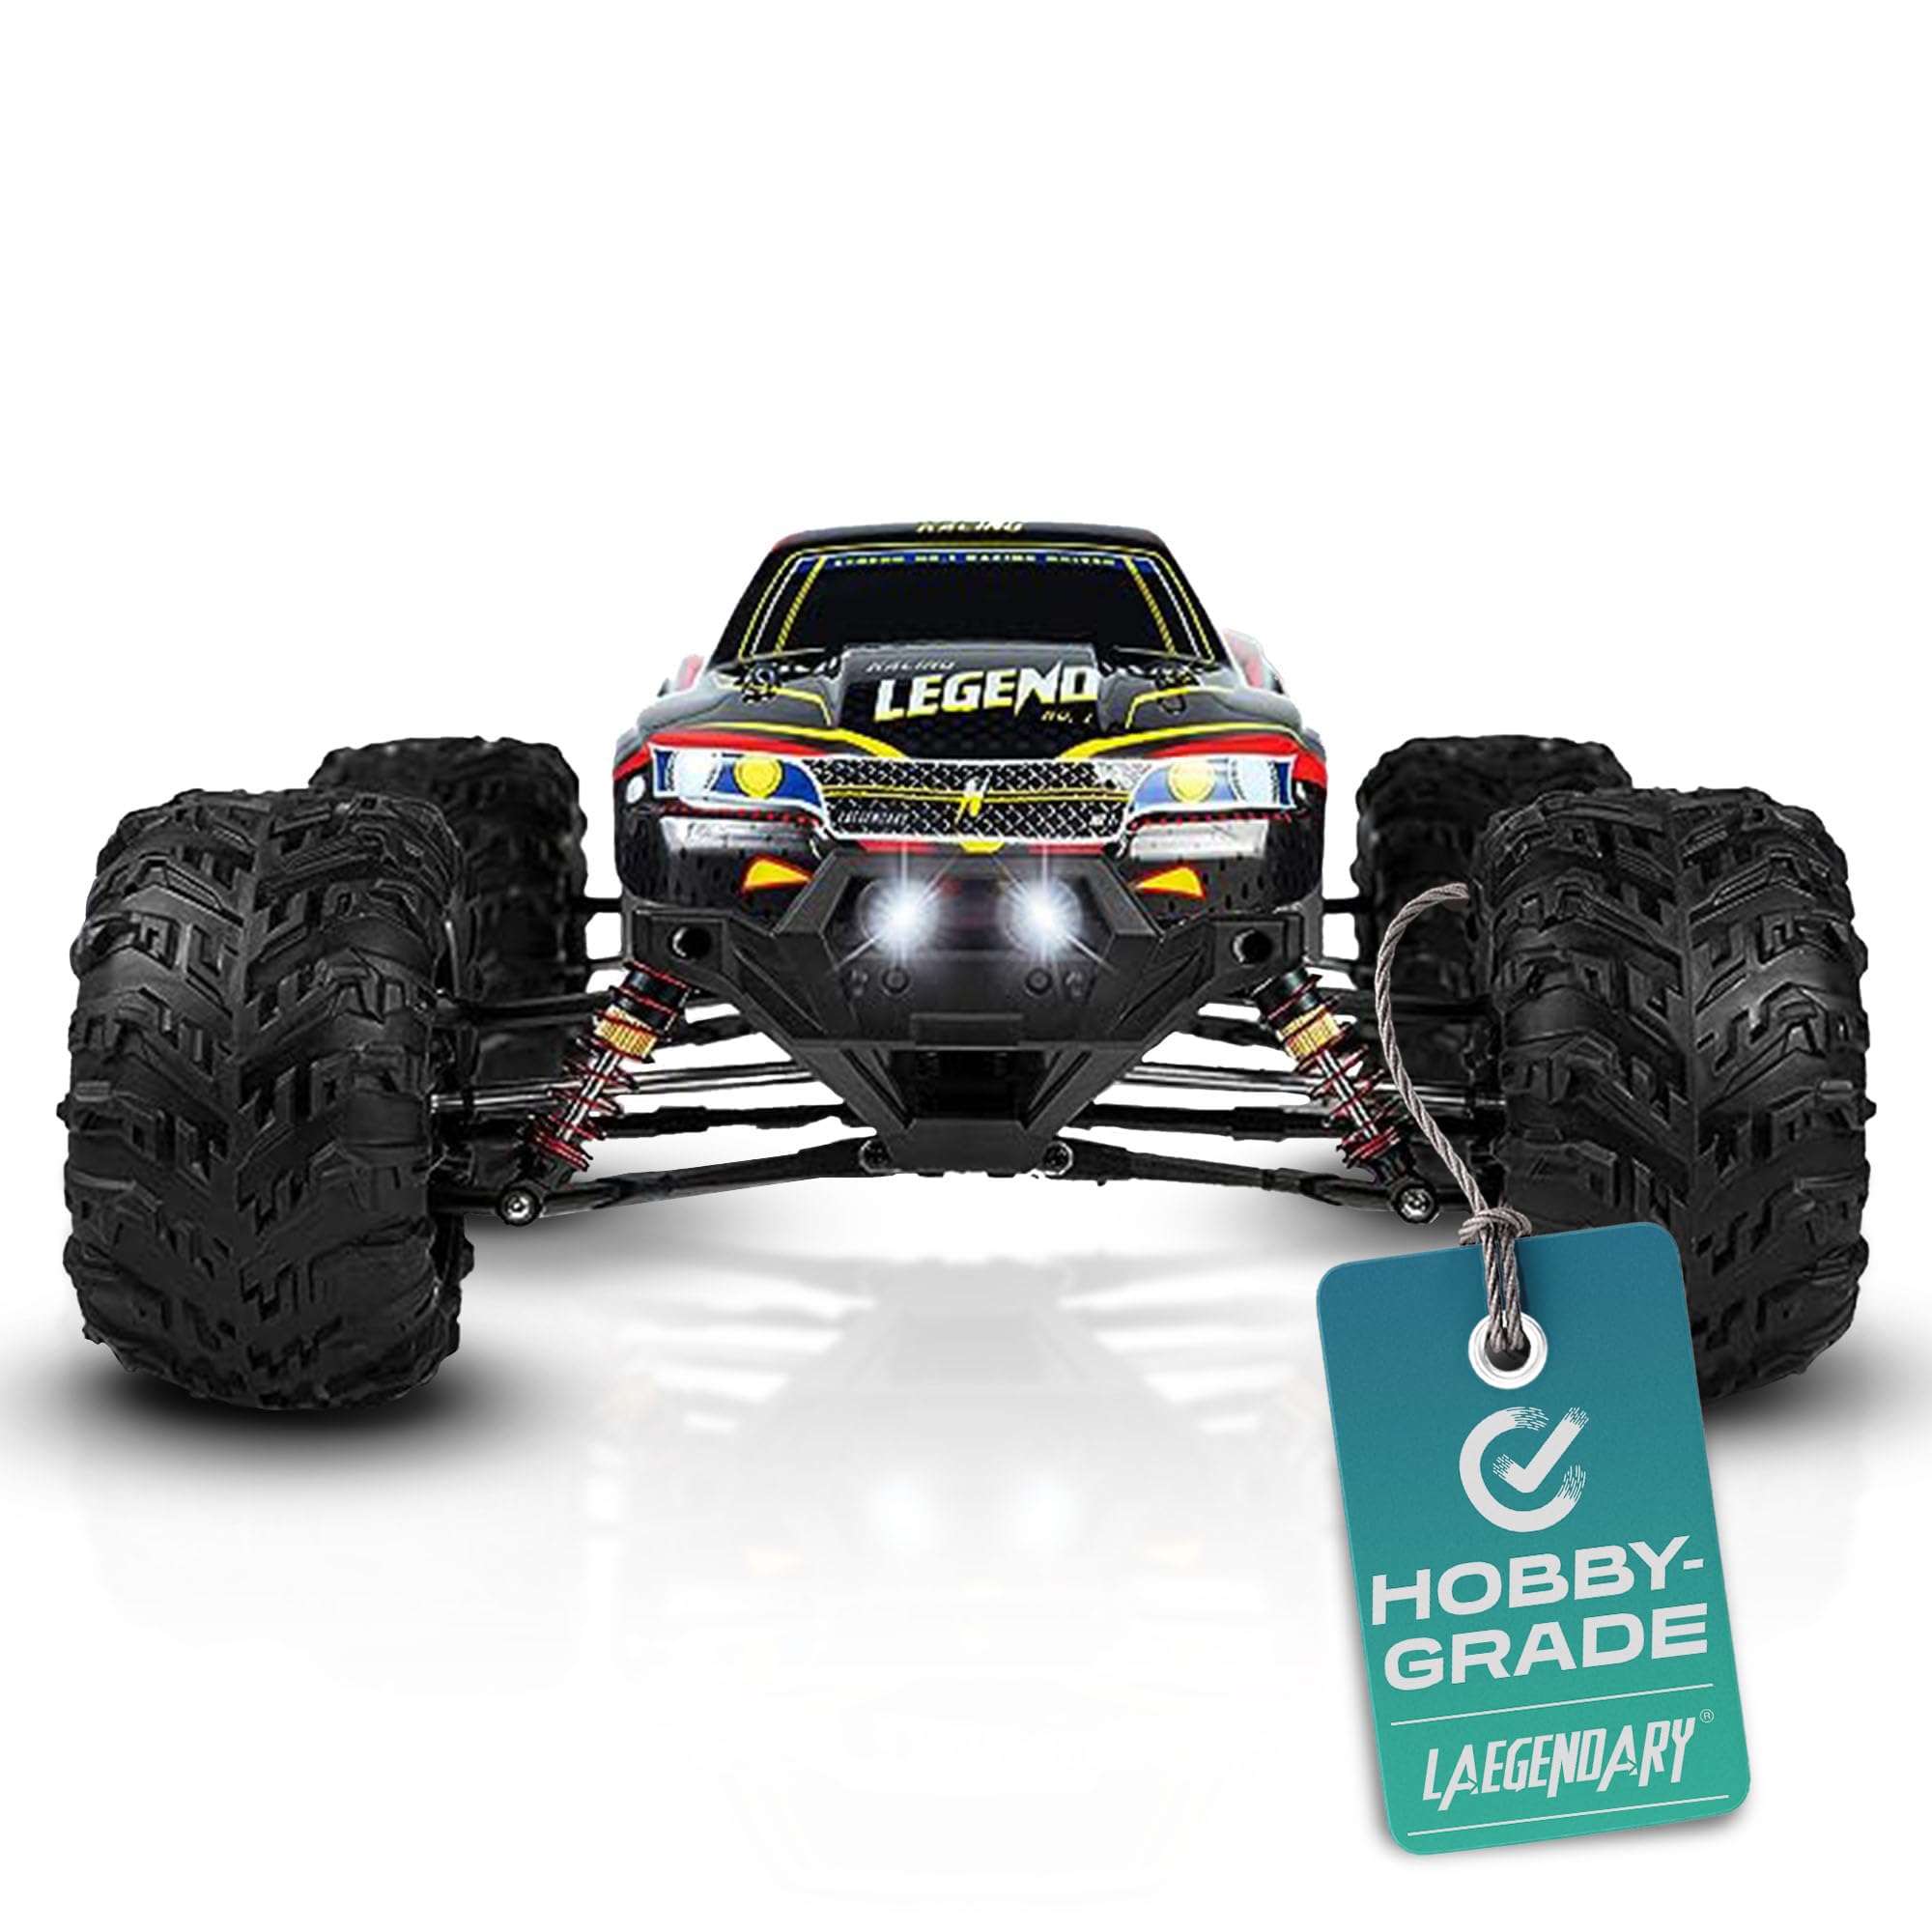 Hobby Grade RC Car 1:10 Scale Brushed Motor with Two Batteries, 4x4 Off-Road Waterproof RC Truck, RC $149.39 + Free Shipping $127